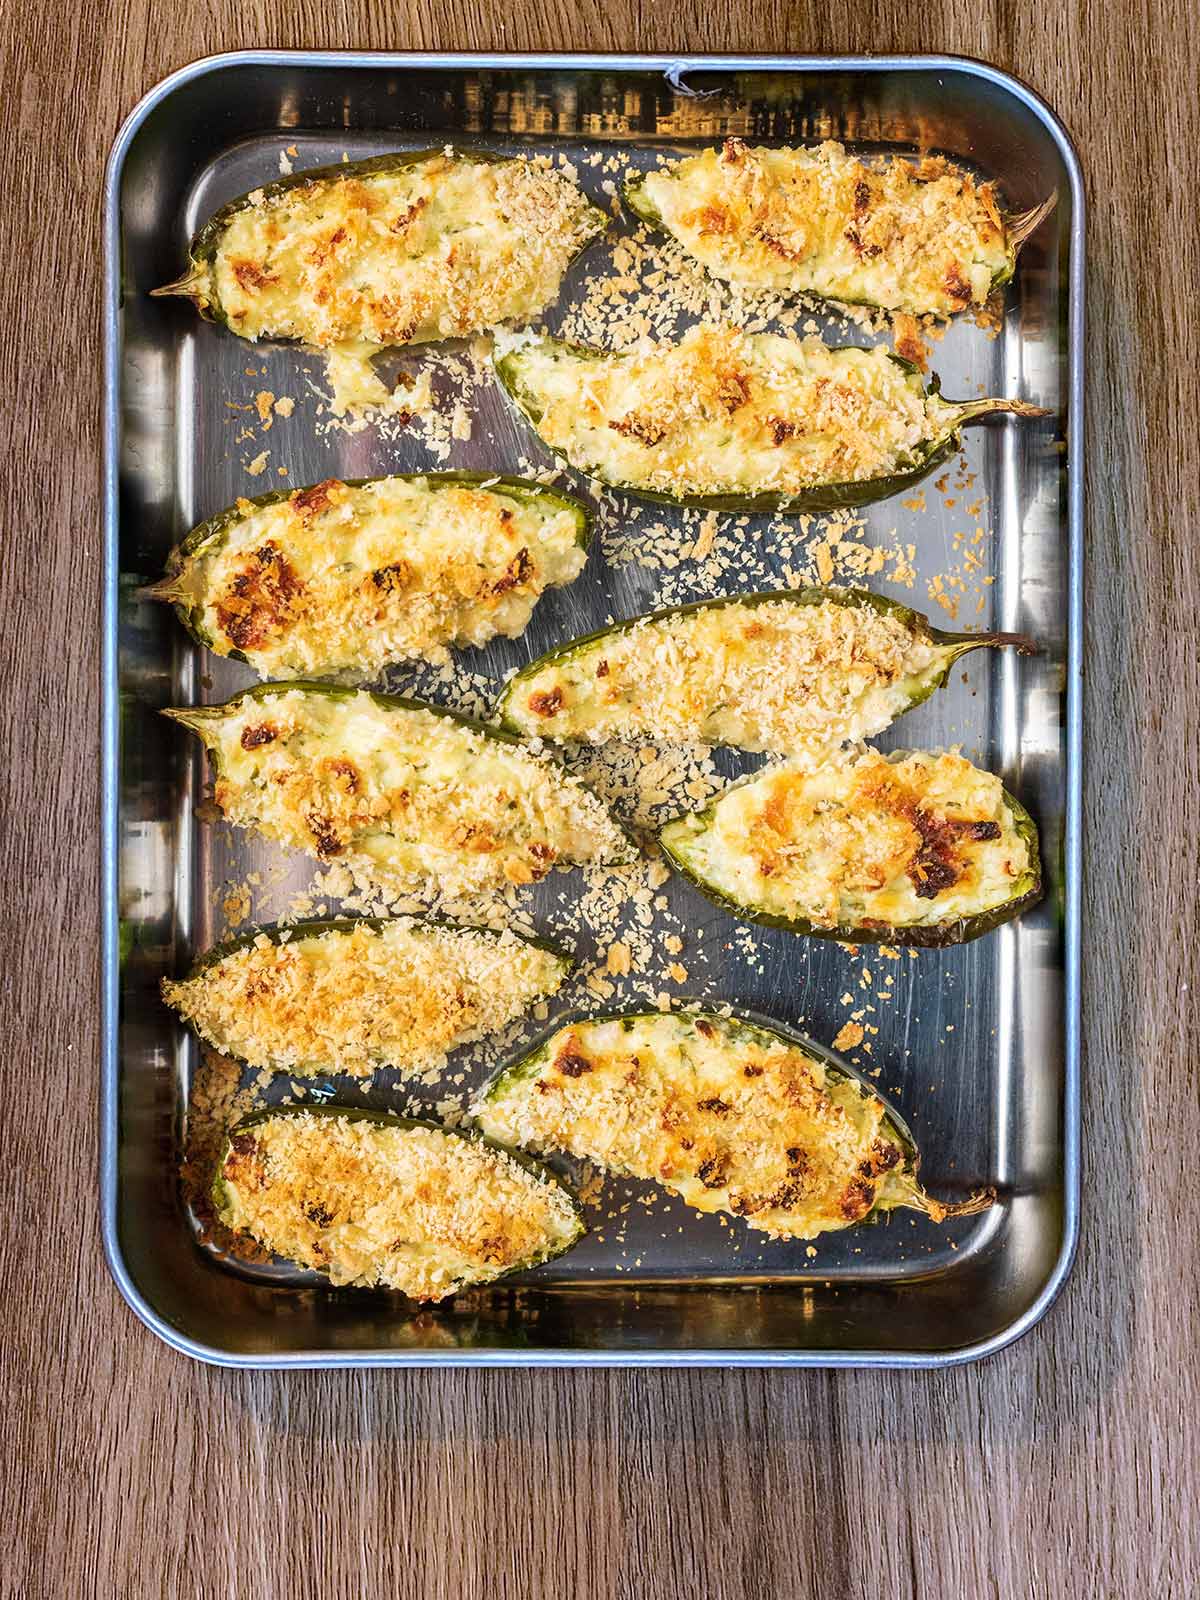 Baked jalapeno poppers on a baking tray.